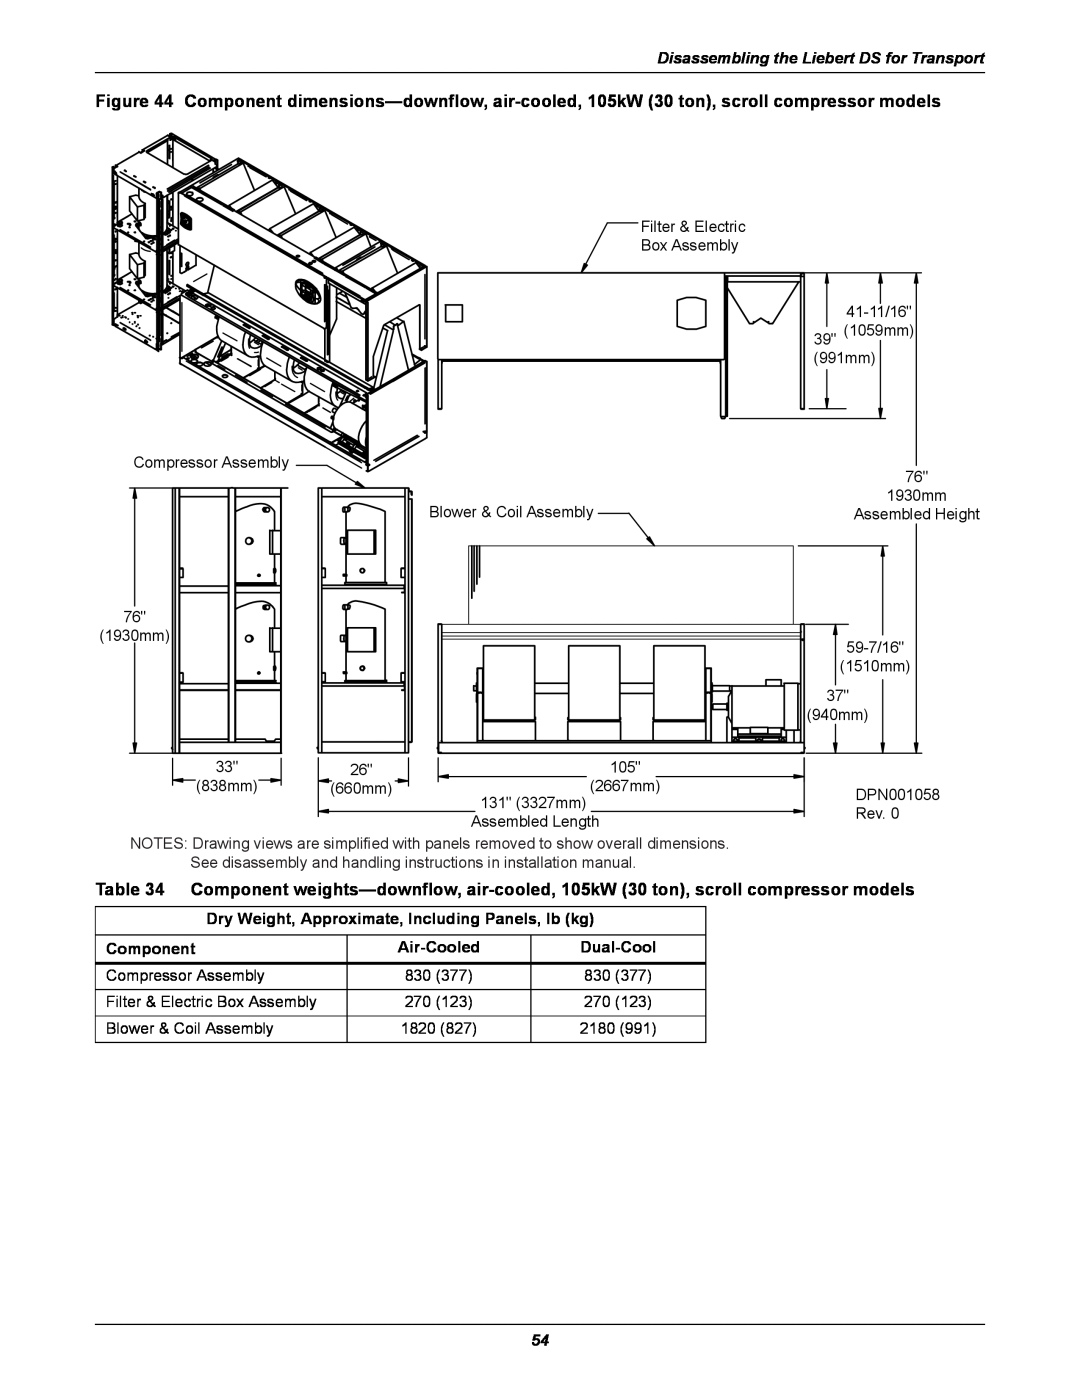 Liebert DS user manual See disassembly and handling instructions in installation manual 